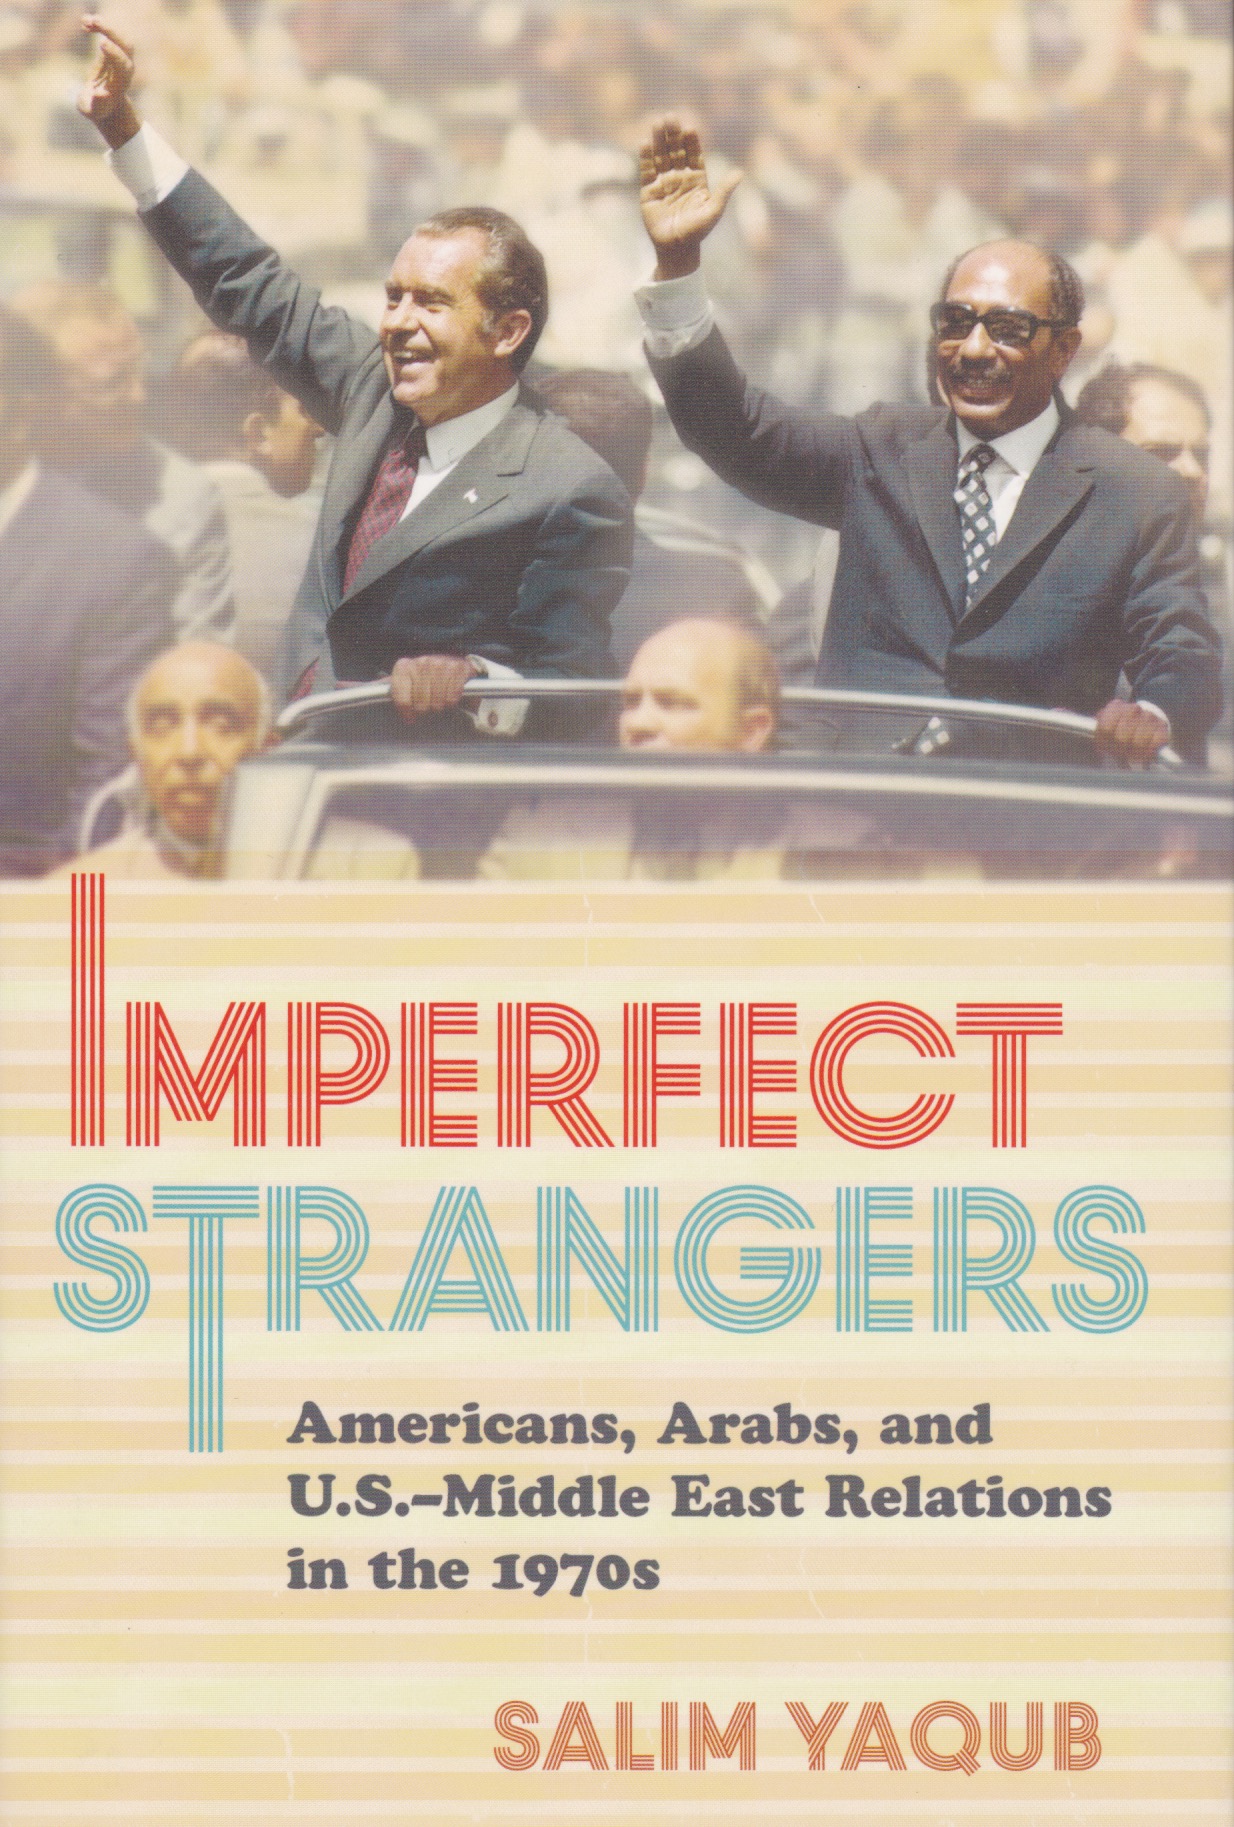 Book cover of Imperfect Strangers by Salim Yaqub.